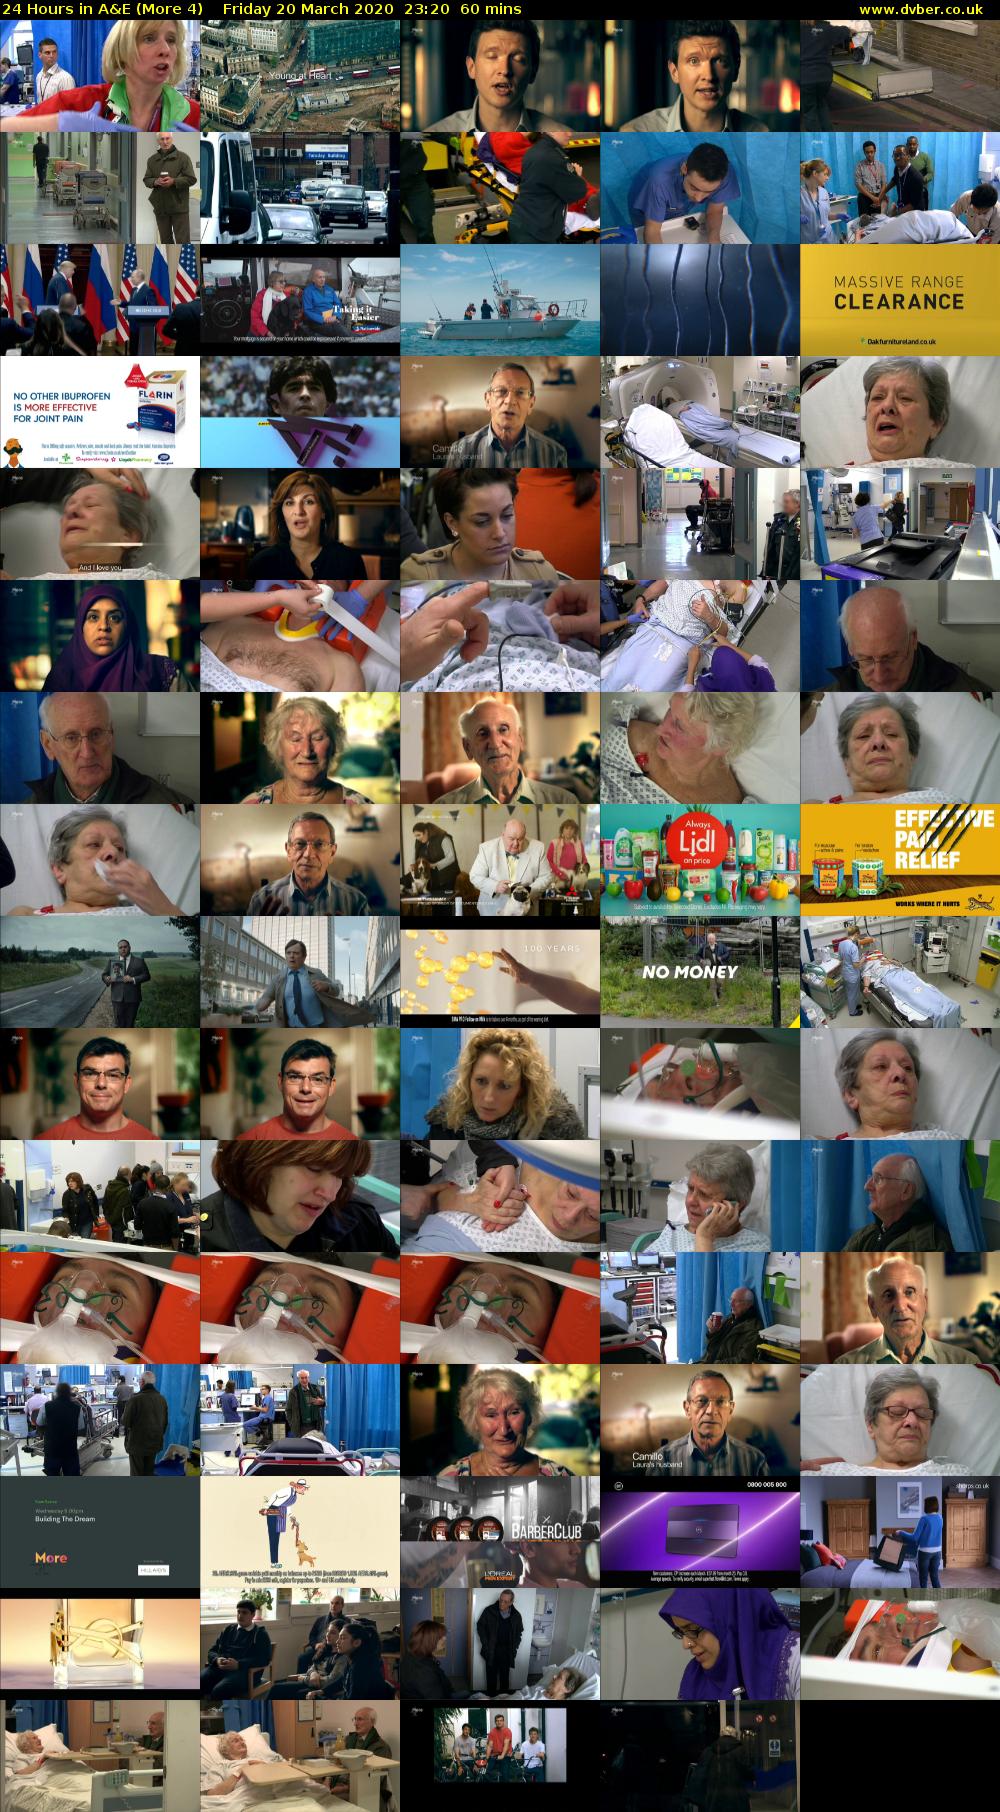 24 Hours in A&E (More 4) Friday 20 March 2020 23:20 - 00:20